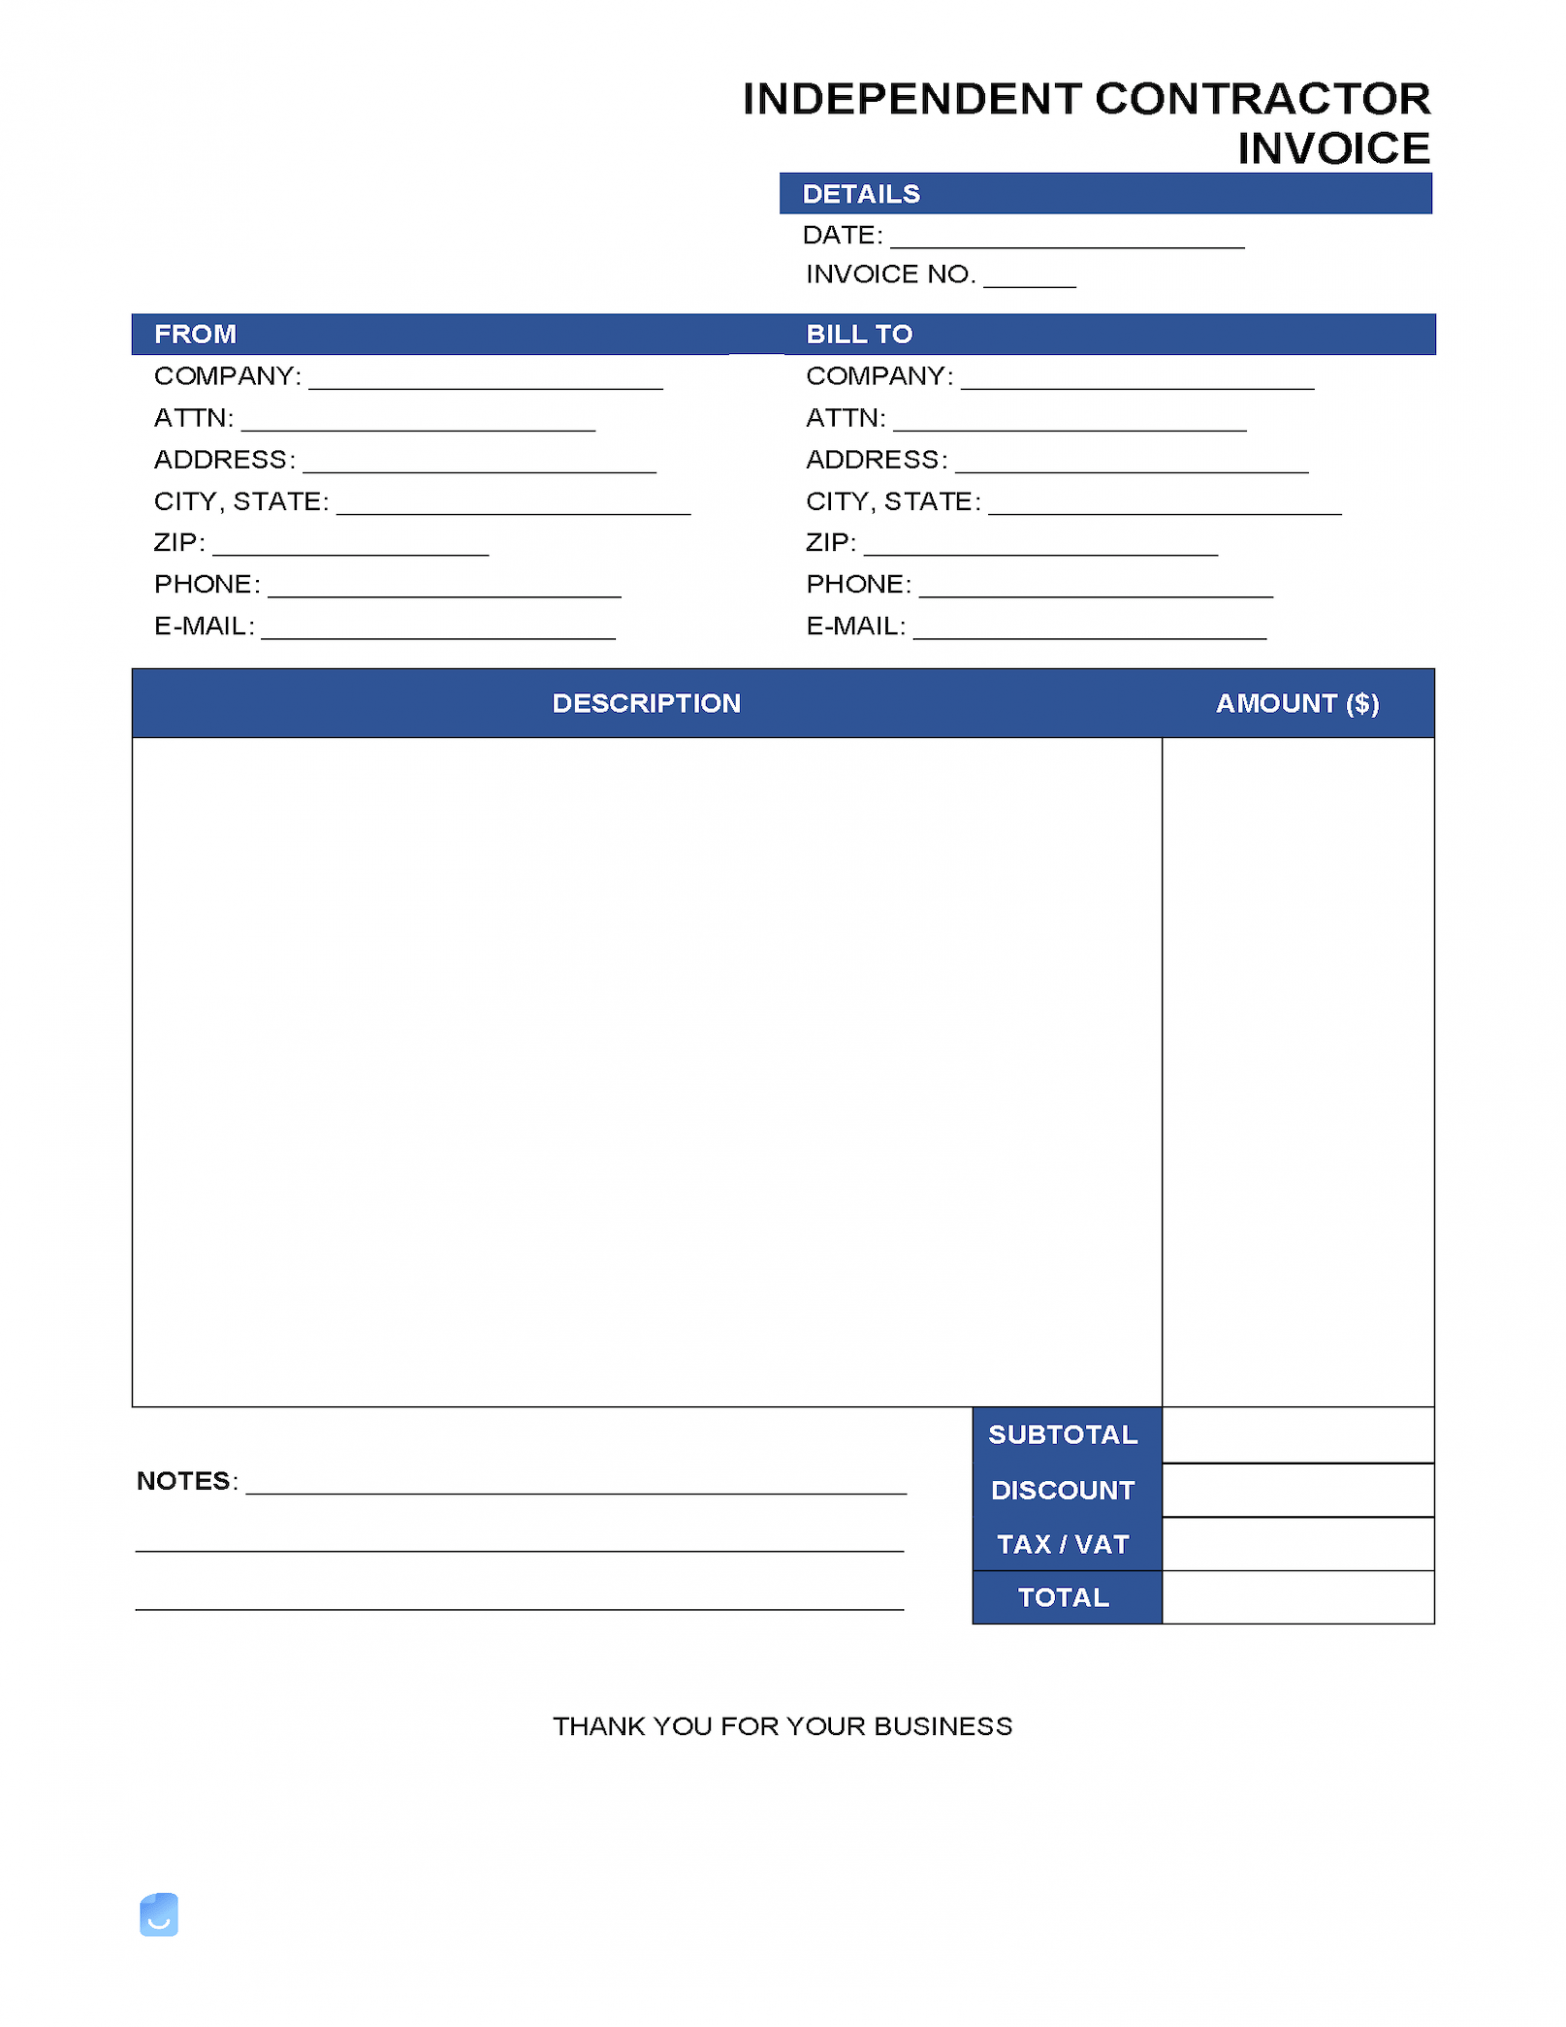 Sample Independent Contractor Billing Invoice Template Doc